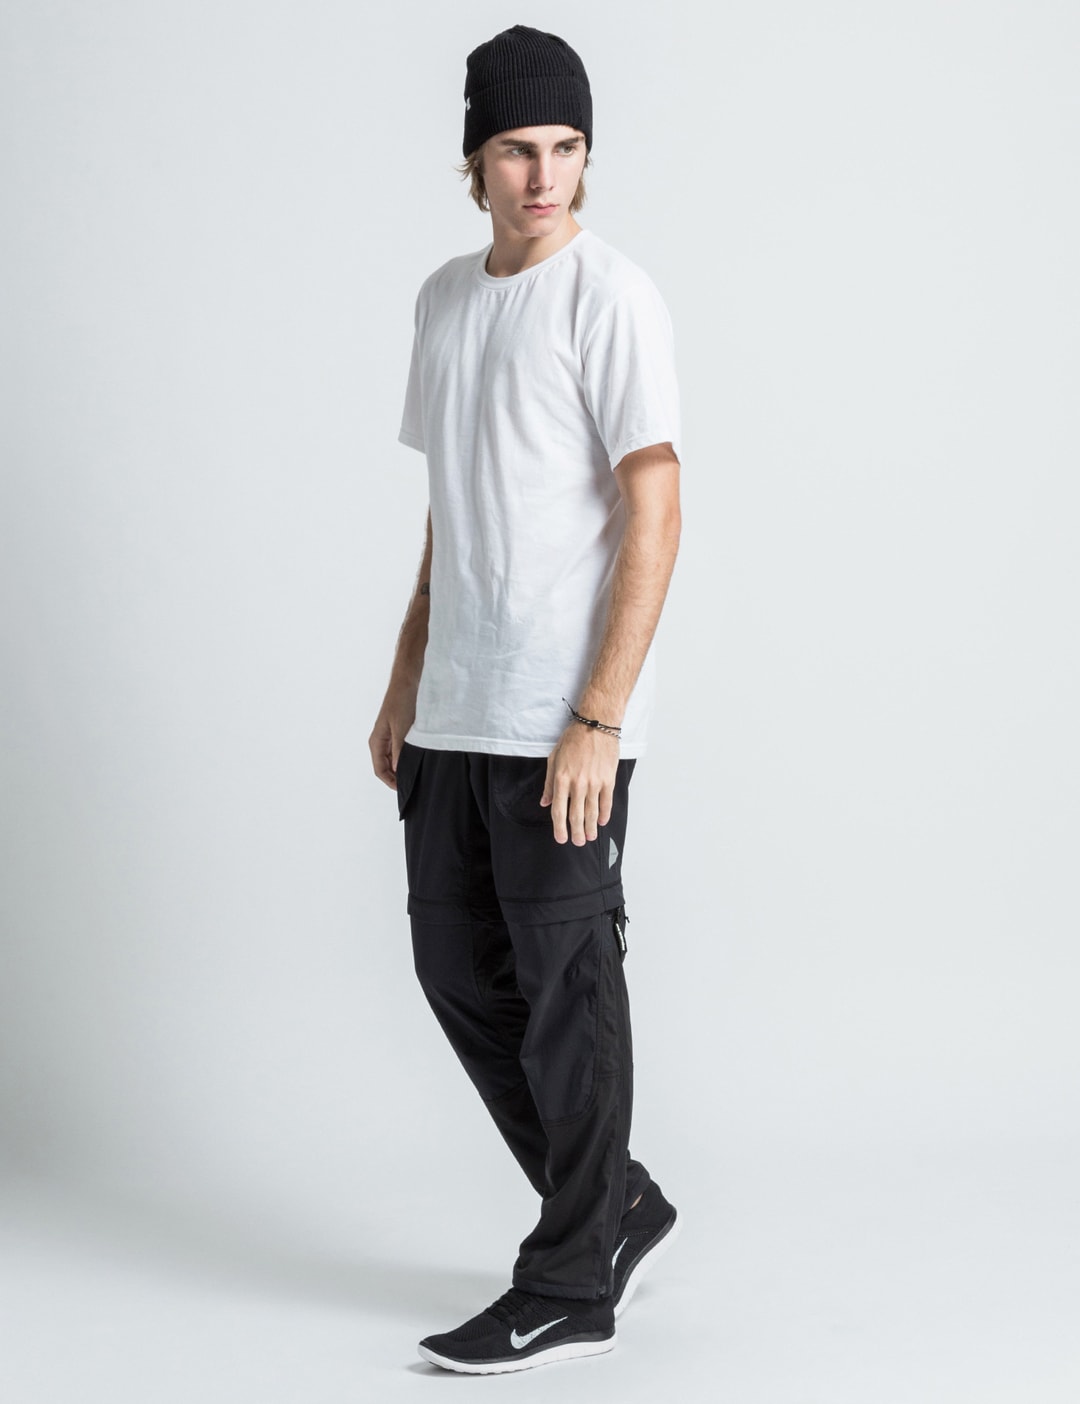 and wander - Black AW-FF724 Pants | HBX - Globally Curated Fashion and ...